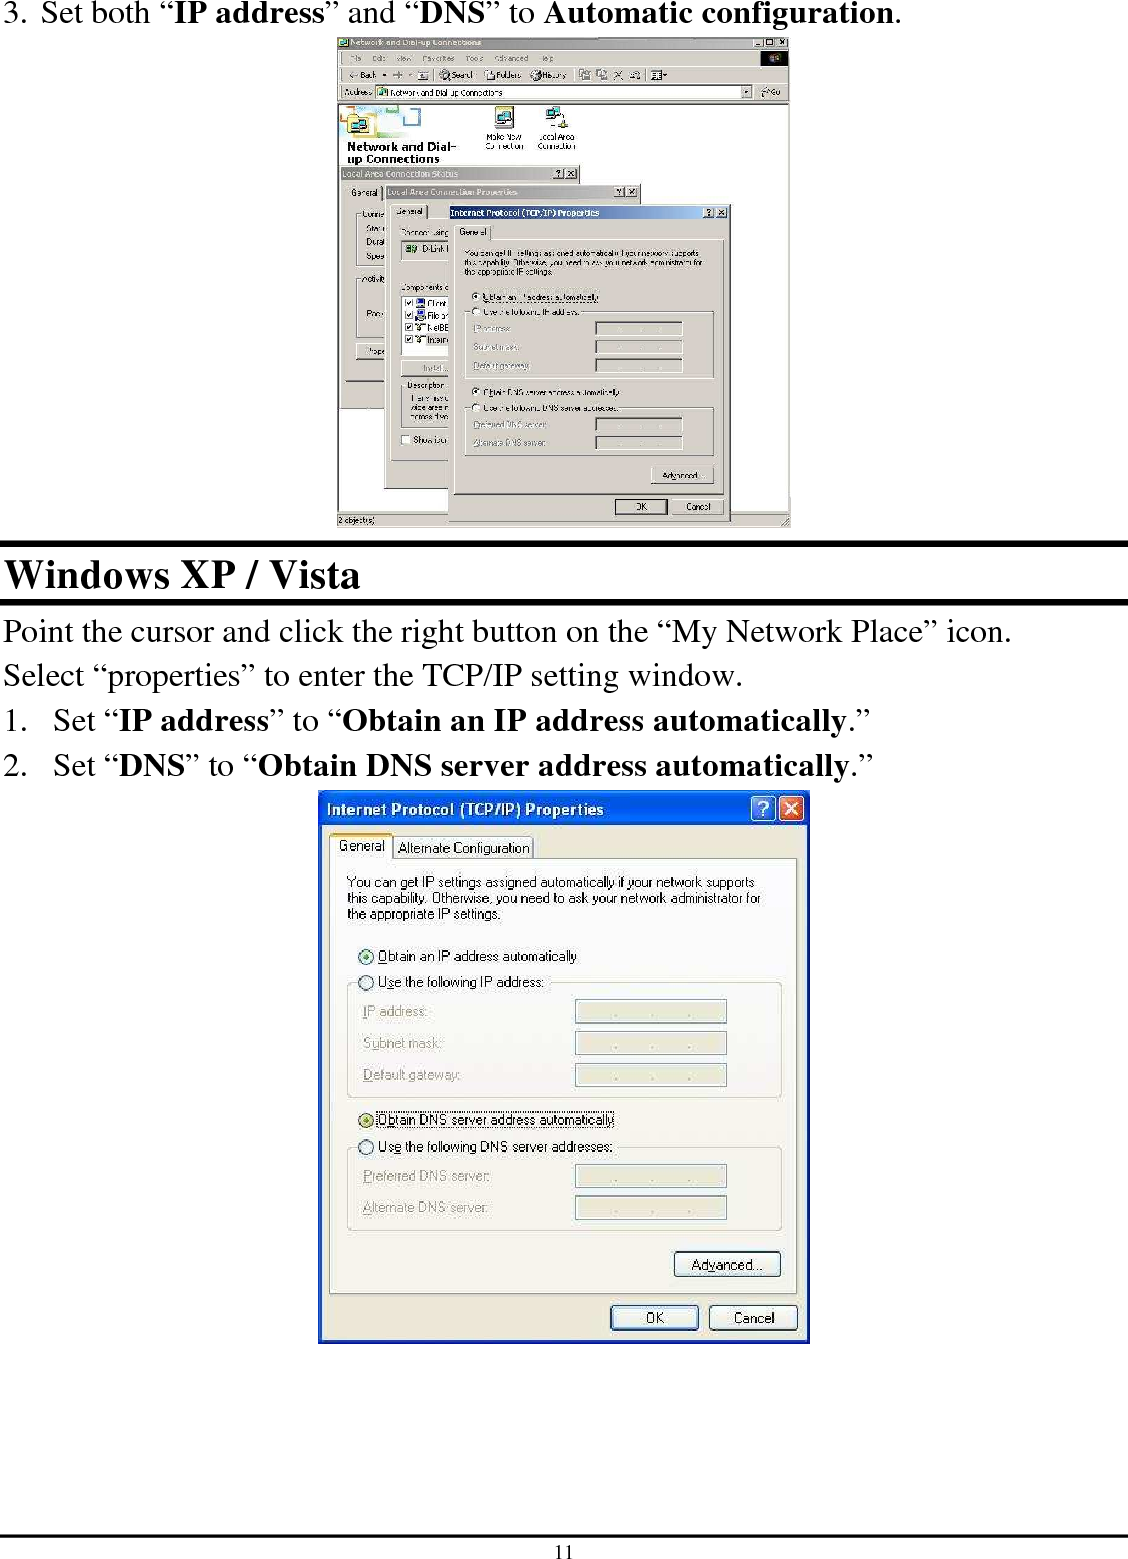 11 3. Set both “IP address” and “DNS” to Automatic configuration.  Windows XP / Vista Point the cursor and click the right button on the “My Network Place” icon. Select “properties” to enter the TCP/IP setting window. 1. Set “IP address” to “Obtain an IP address automatically.” 2. Set “DNS” to “Obtain DNS server address automatically.”  